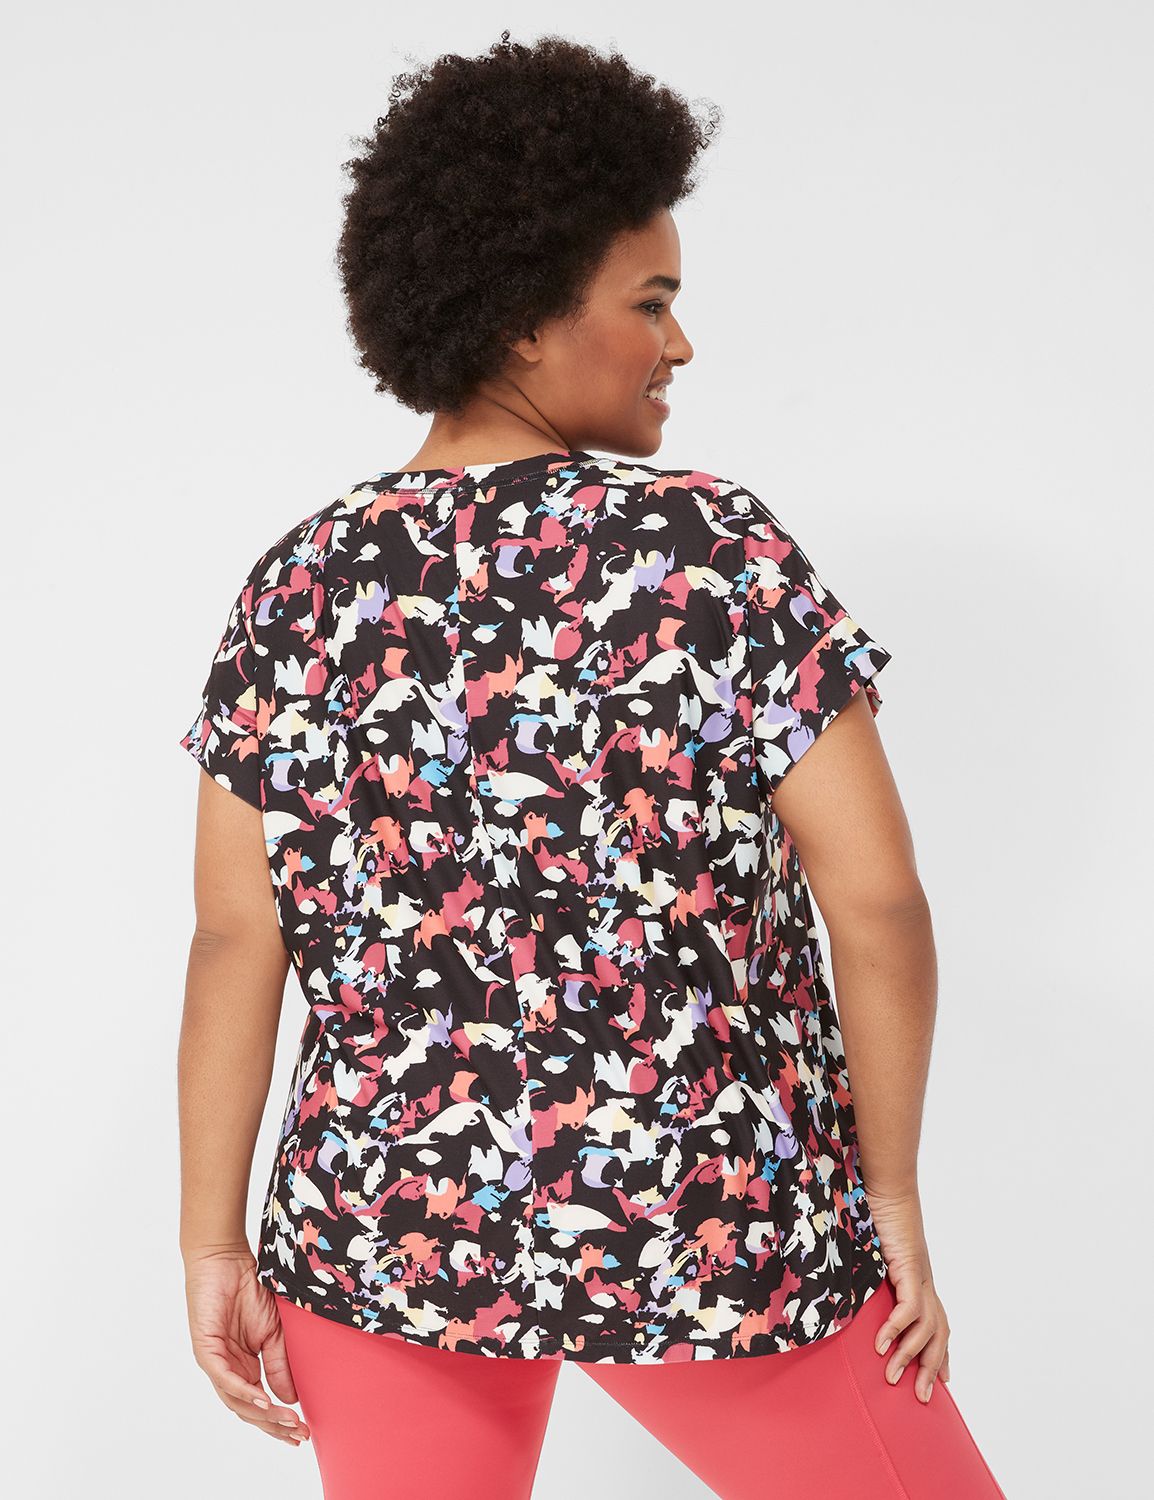 Lane Bryant - InStyle is sharing the LIVI love. Peek our LIVI